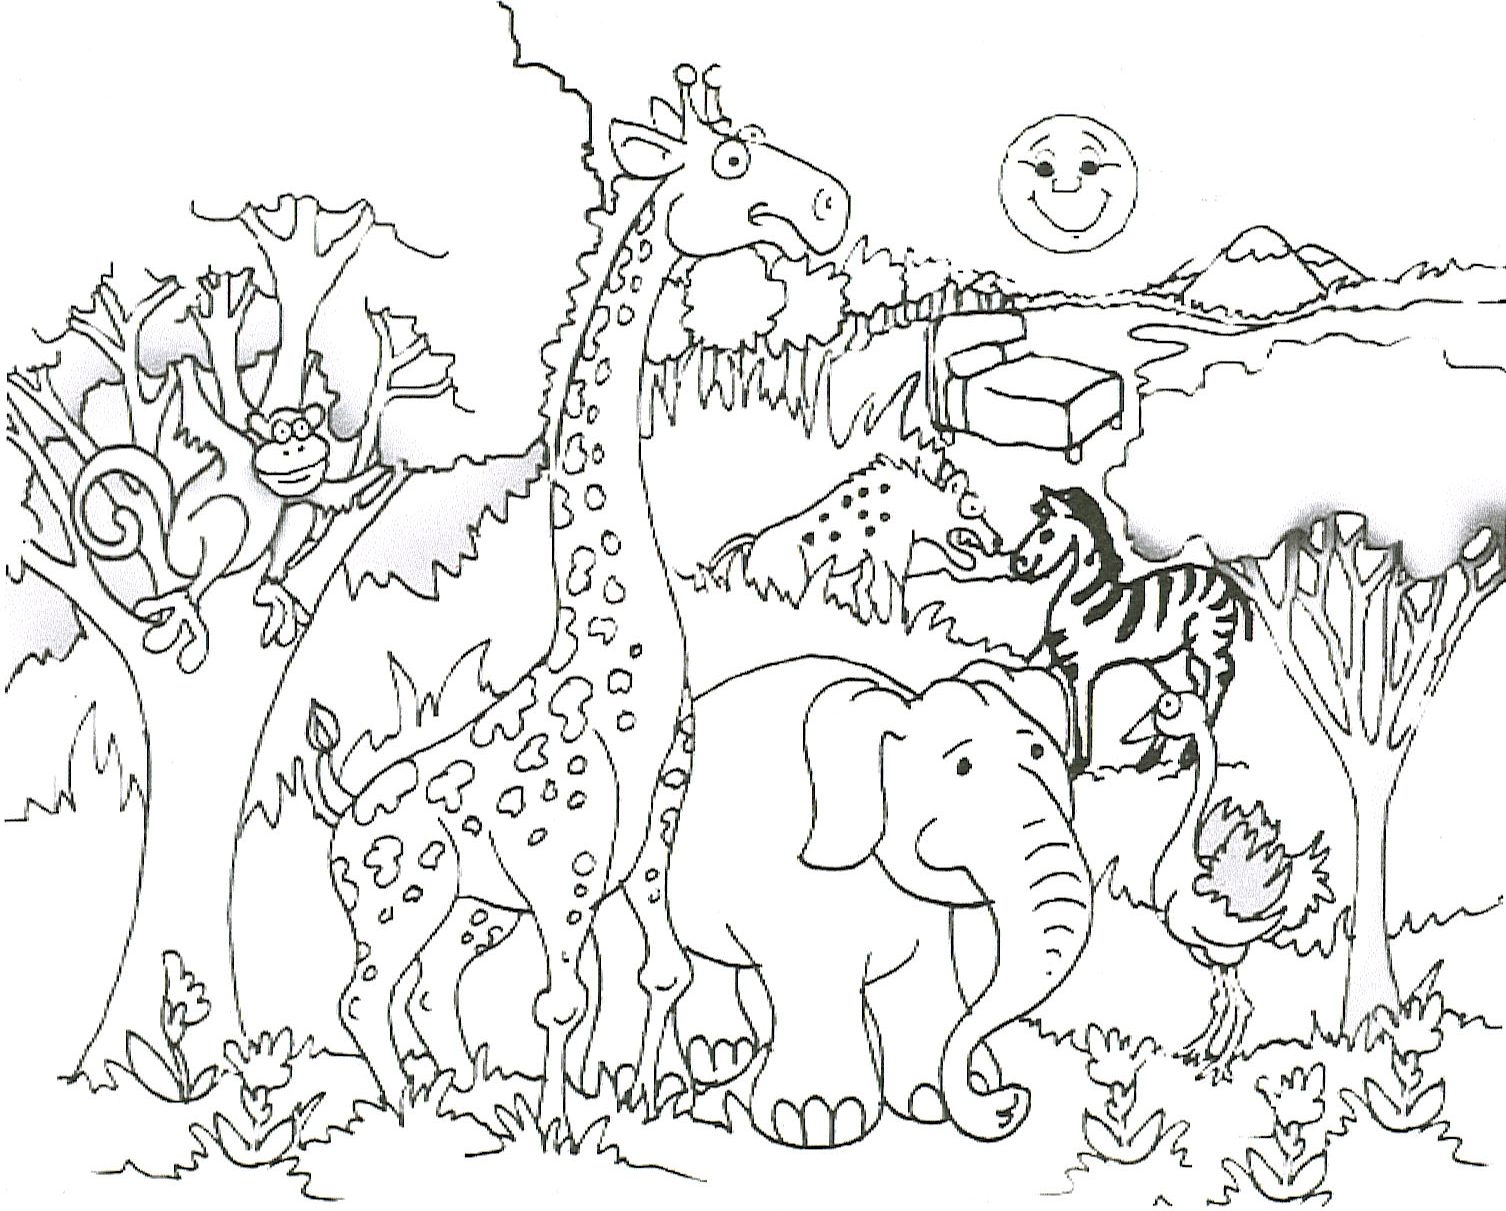 Giraffe And His Friends Coloring Page